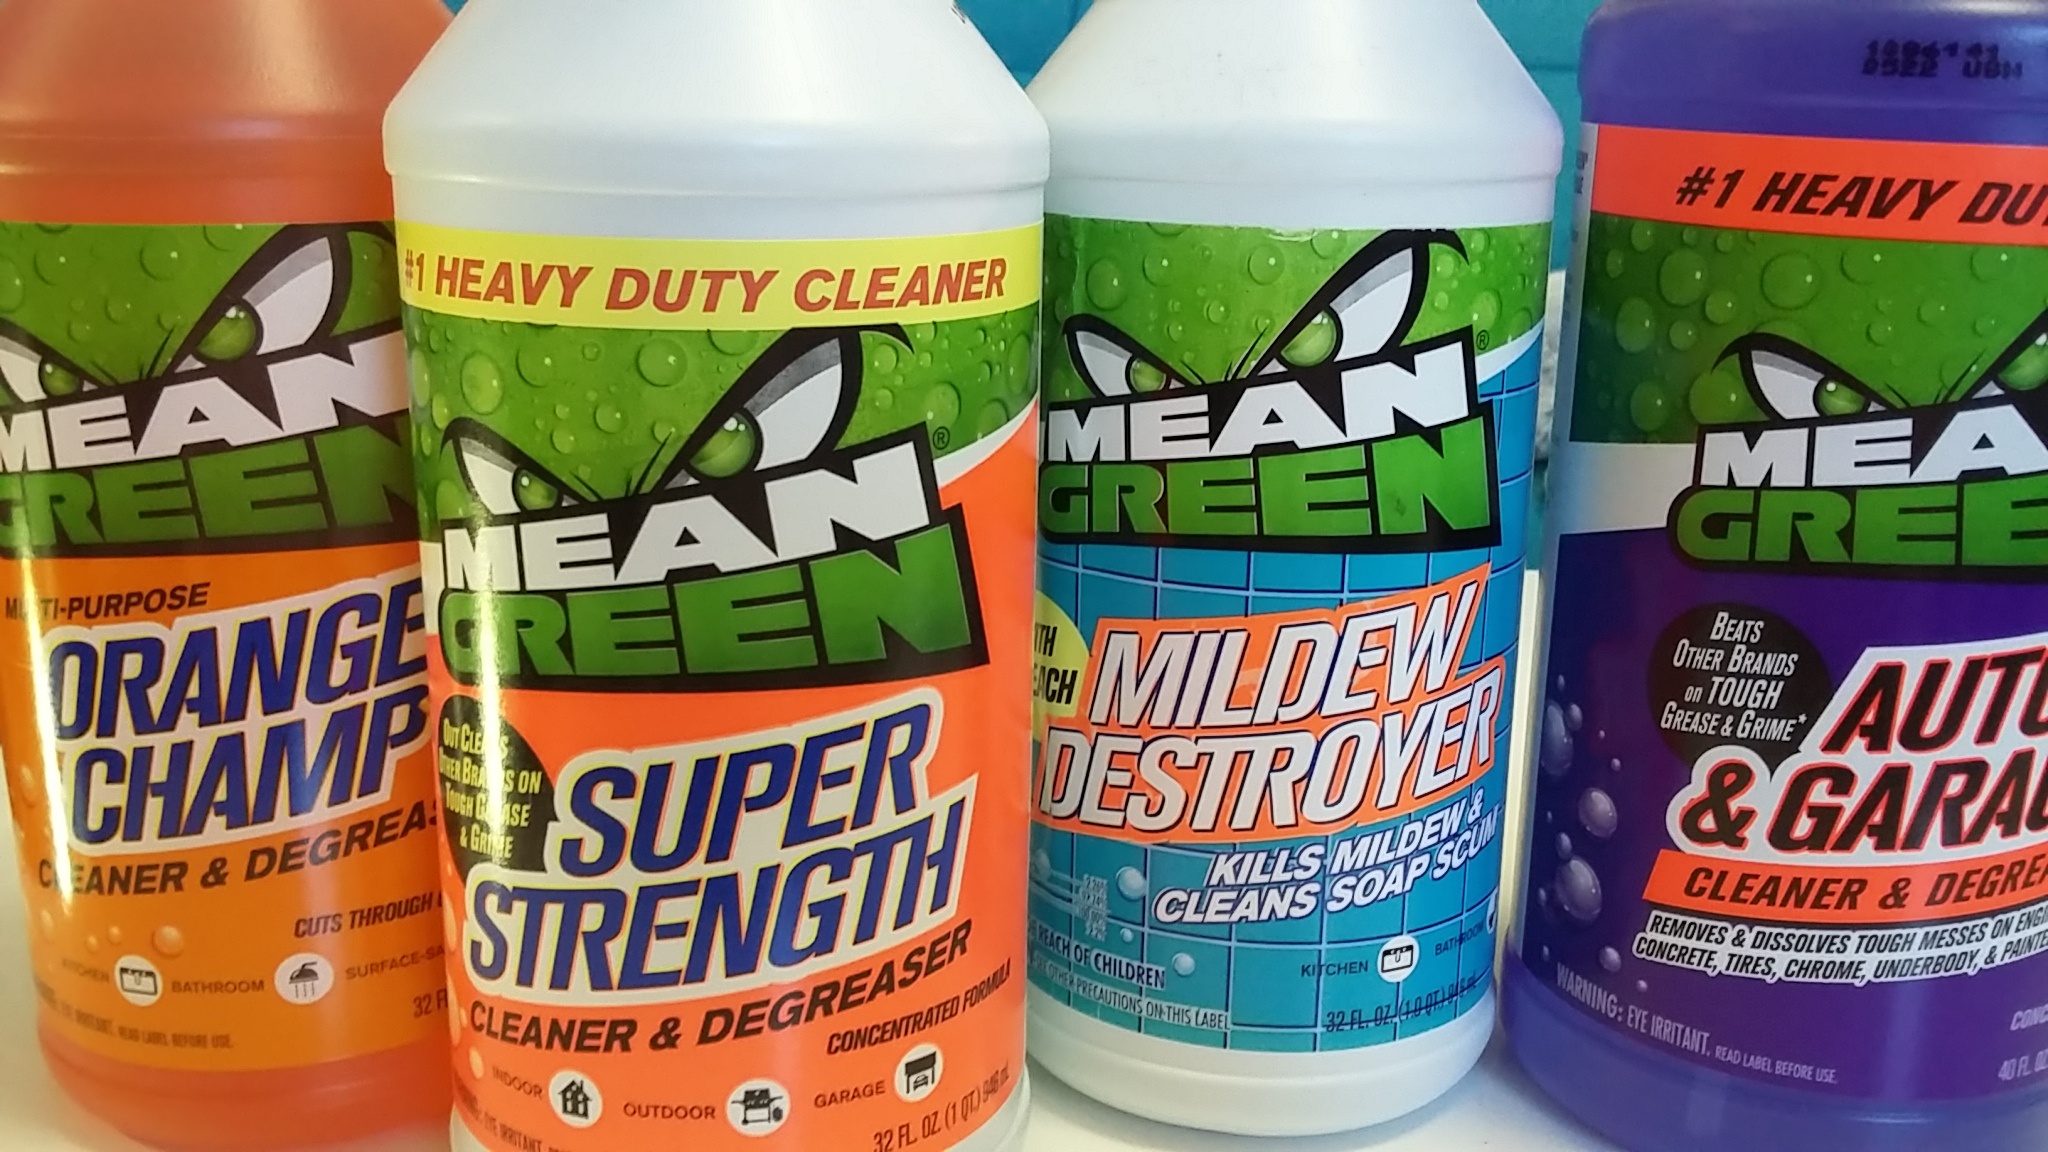 Mean Green, for all your cleaning needs